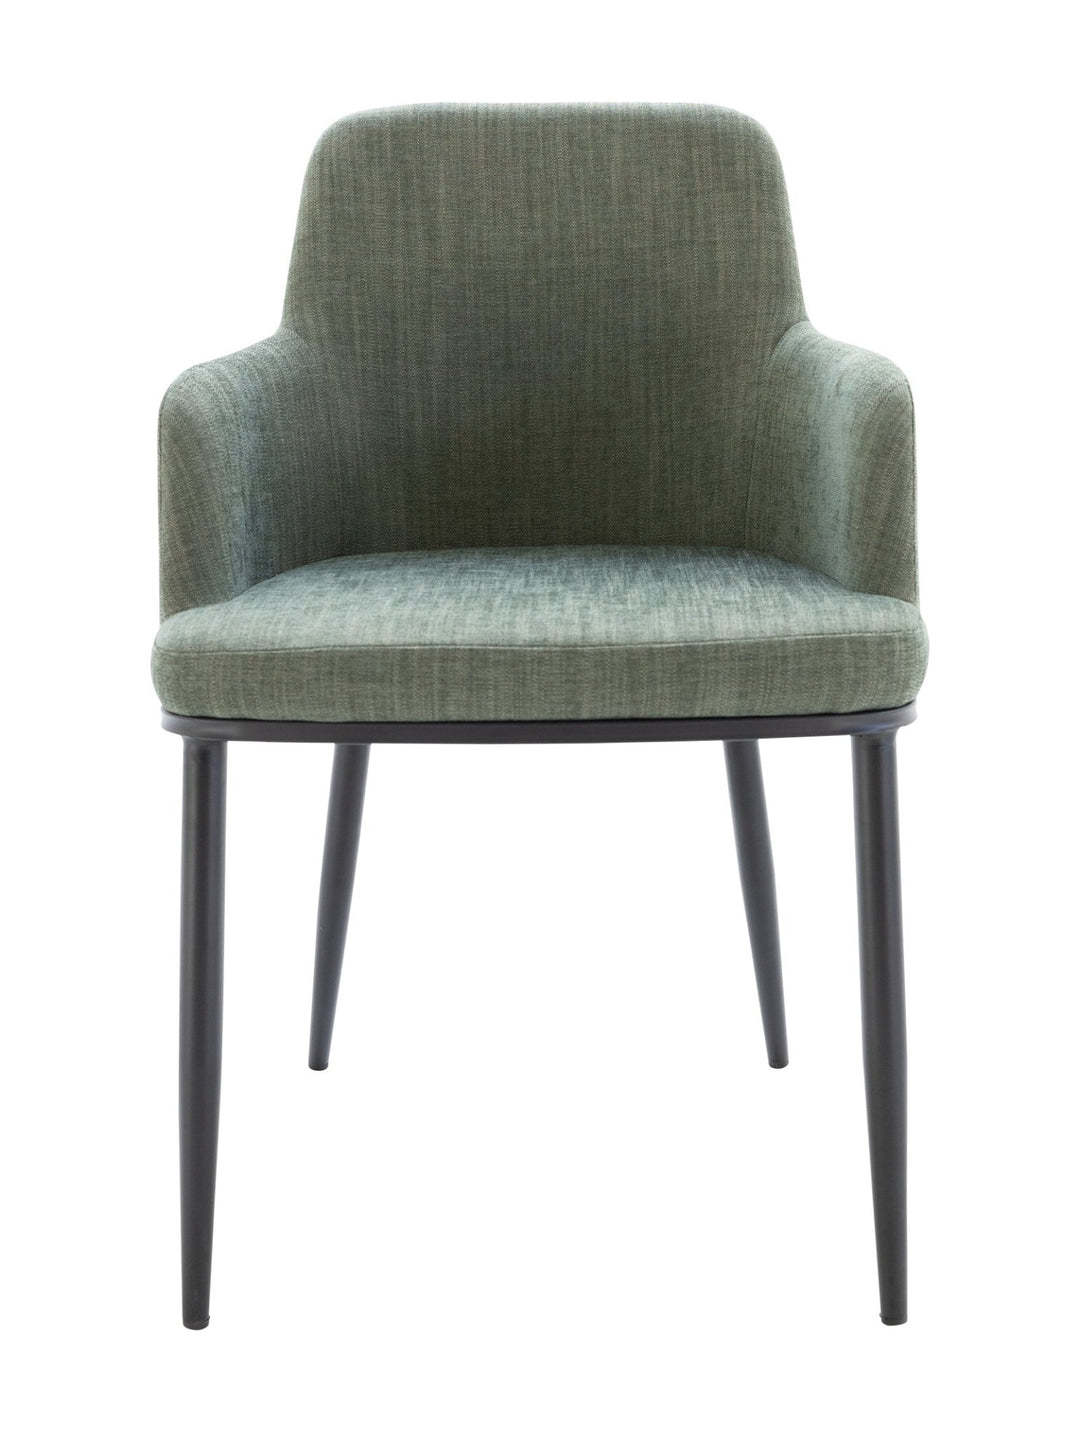 Catherine Dining Chair in Hunter Alpine - Kitchen & Dining Room Chairs - Hertex Haus - badge_fabric